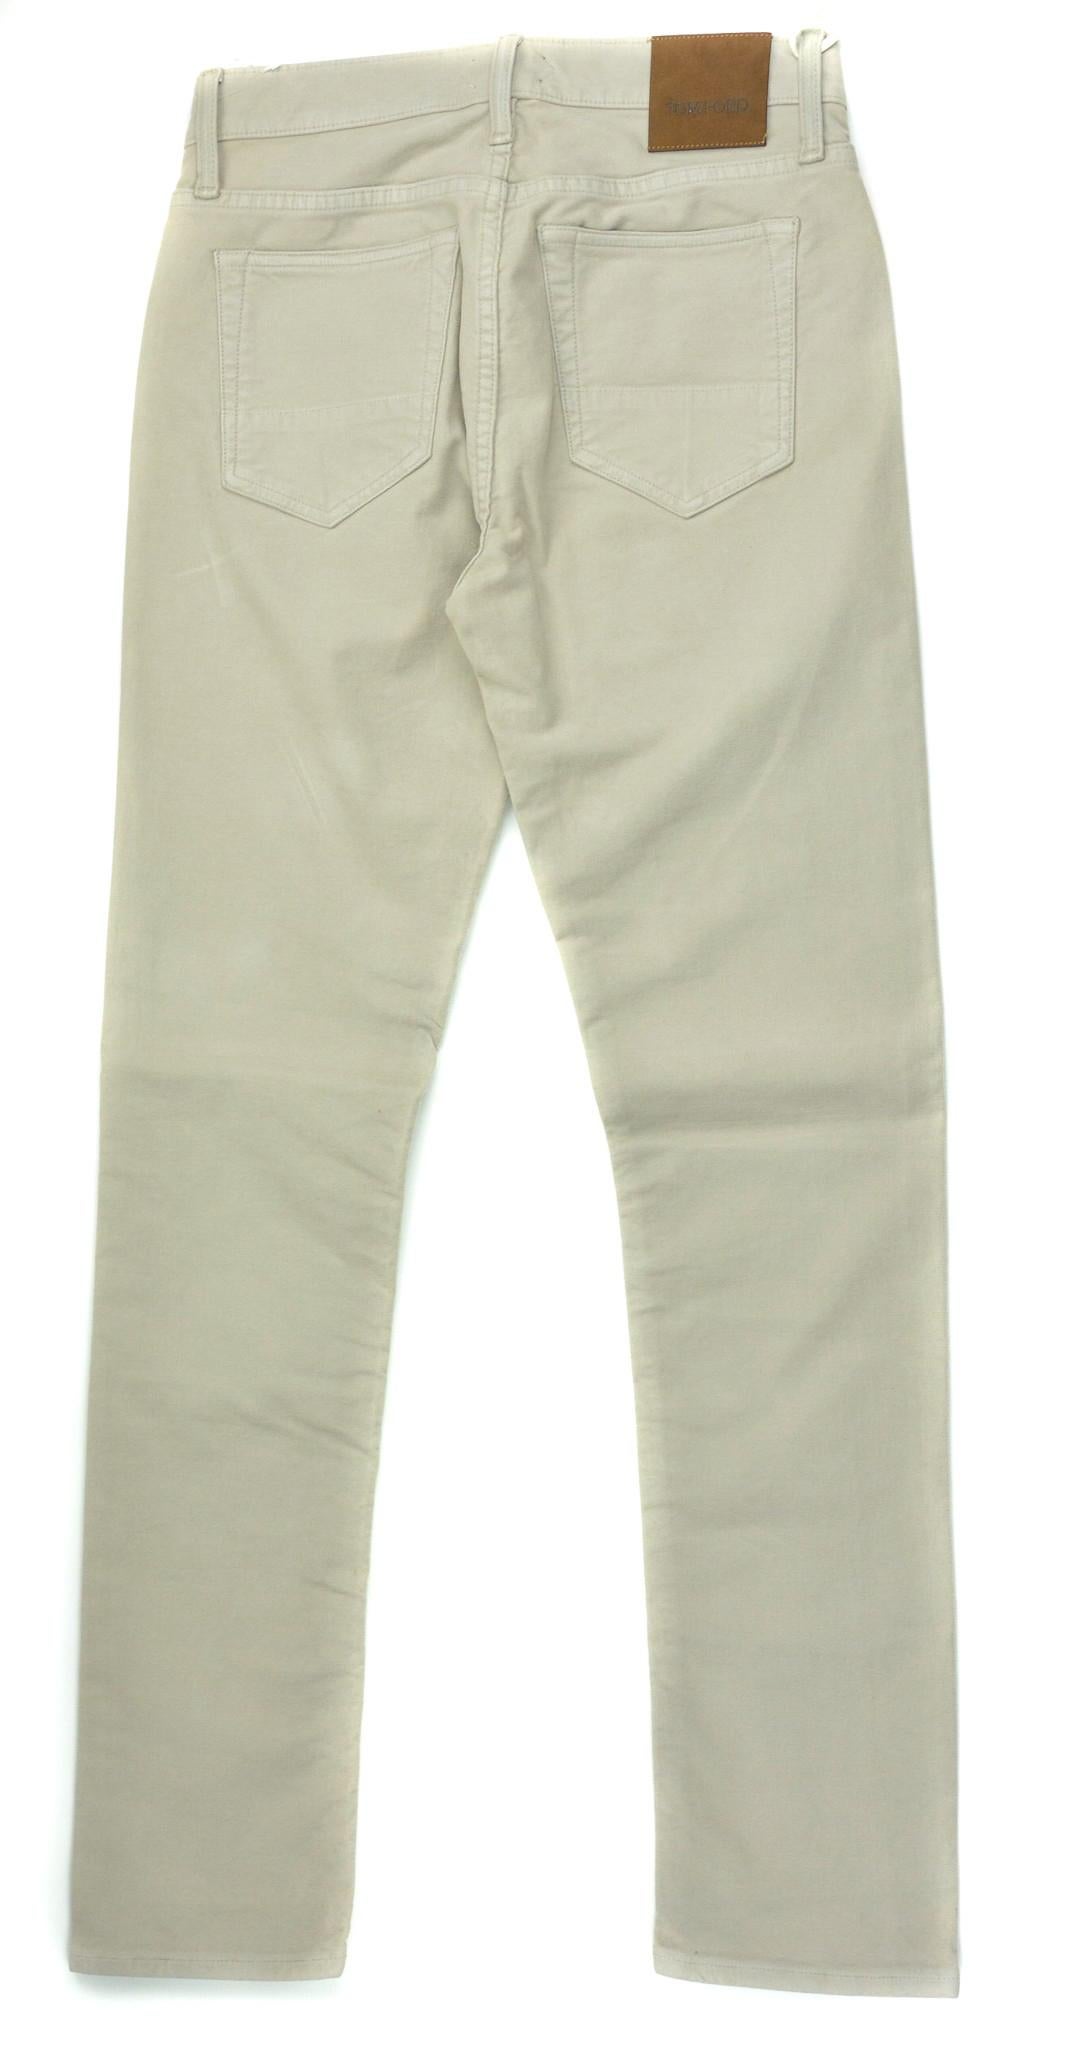 Bask in the appreciation for aesthetics in your light grey Tom Ford Jeans. These pants feature a cool light grey color, smooth cotton texture, and updated slim fit. You can pair these trousers with a slim fit t shirt or classic white button down for